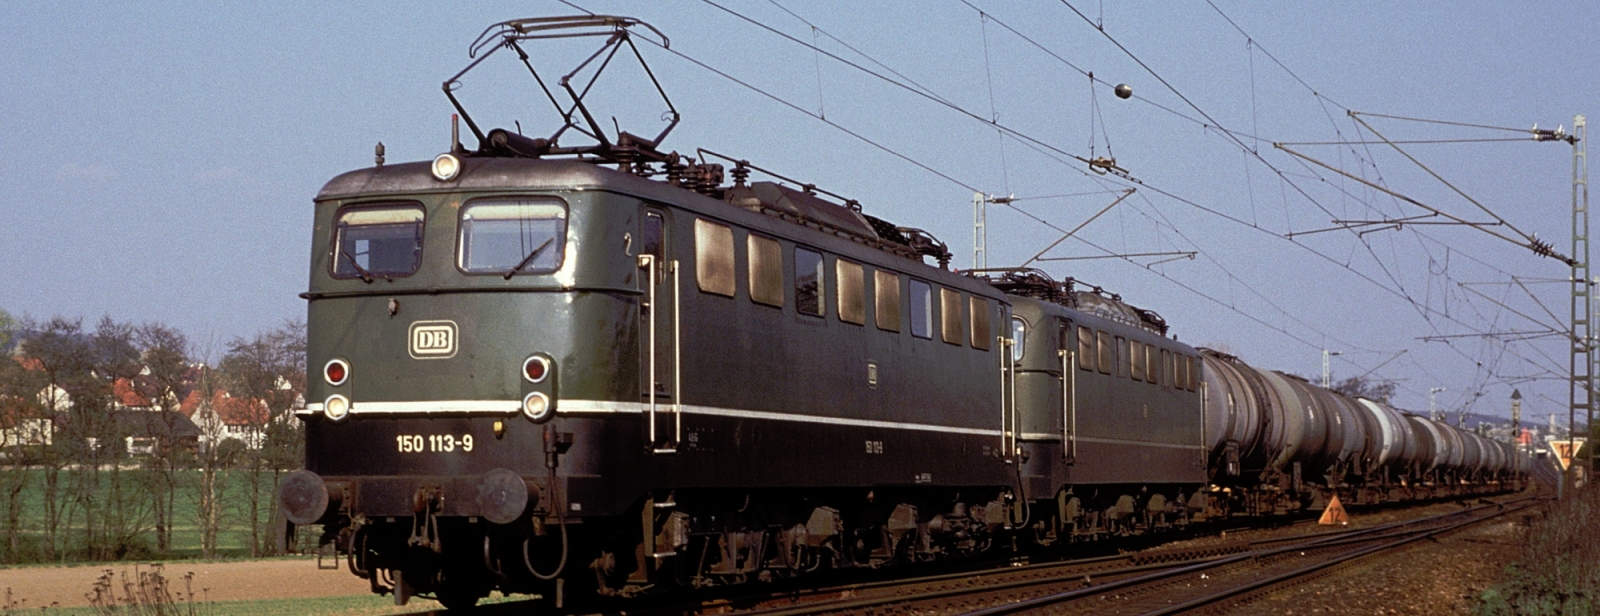 150 113 and 150 150 double-headed in April 1991 near Illingen